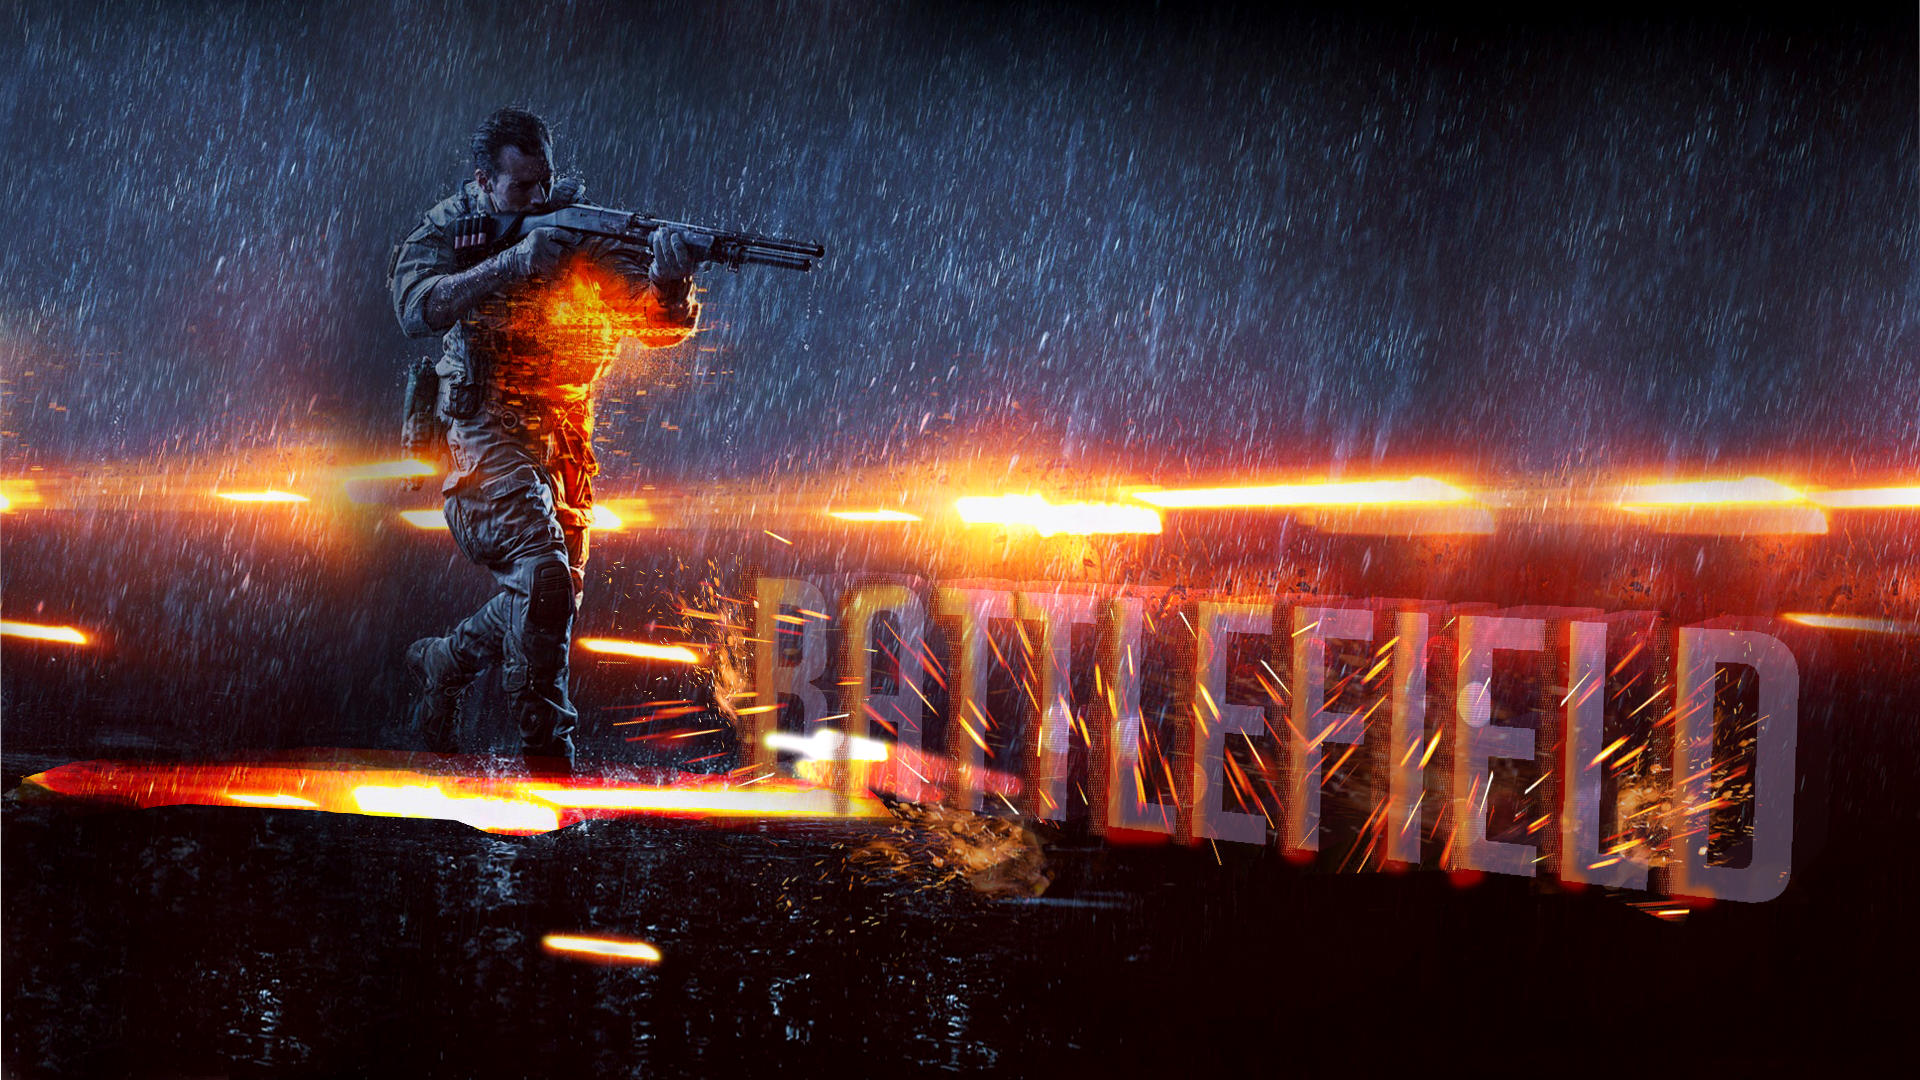 Battlefield 4 Backgrounds Pictures Images